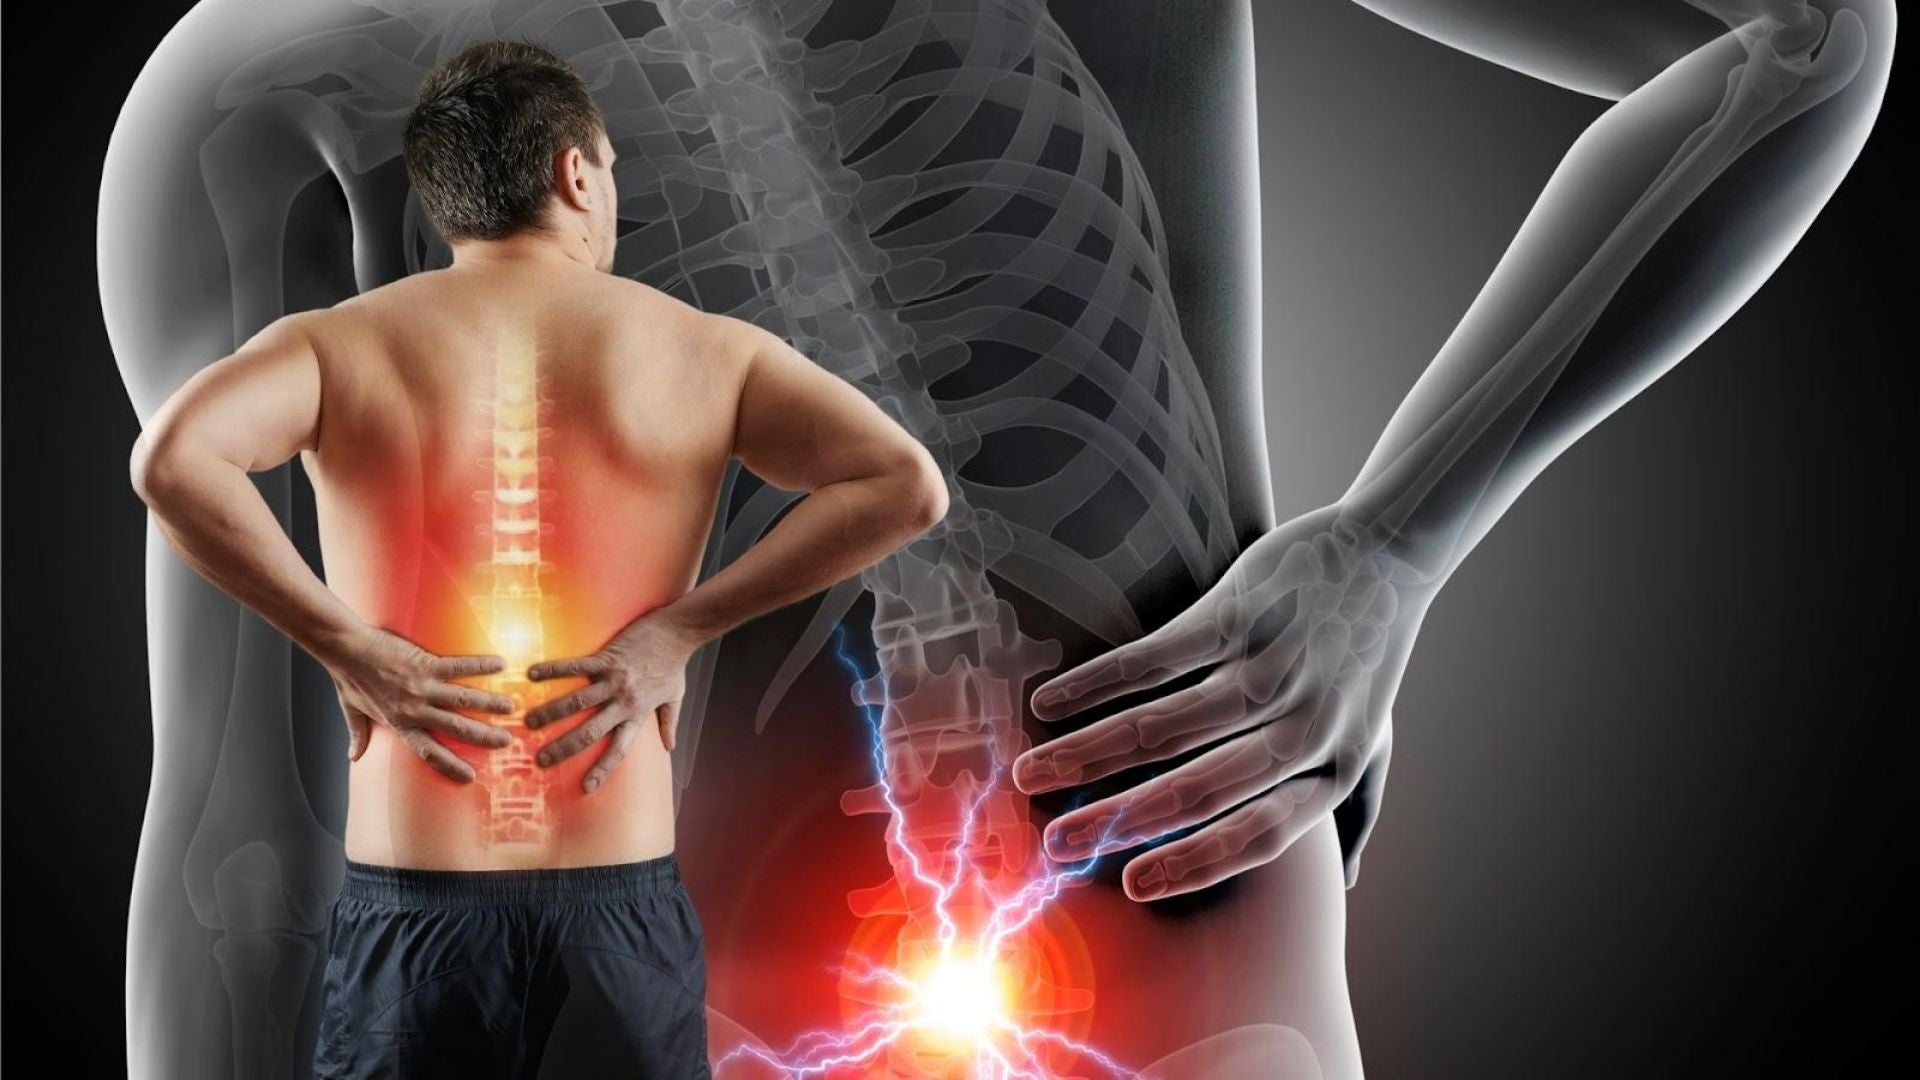 Tips For Relieving Sciatica Pain - Innovative PT